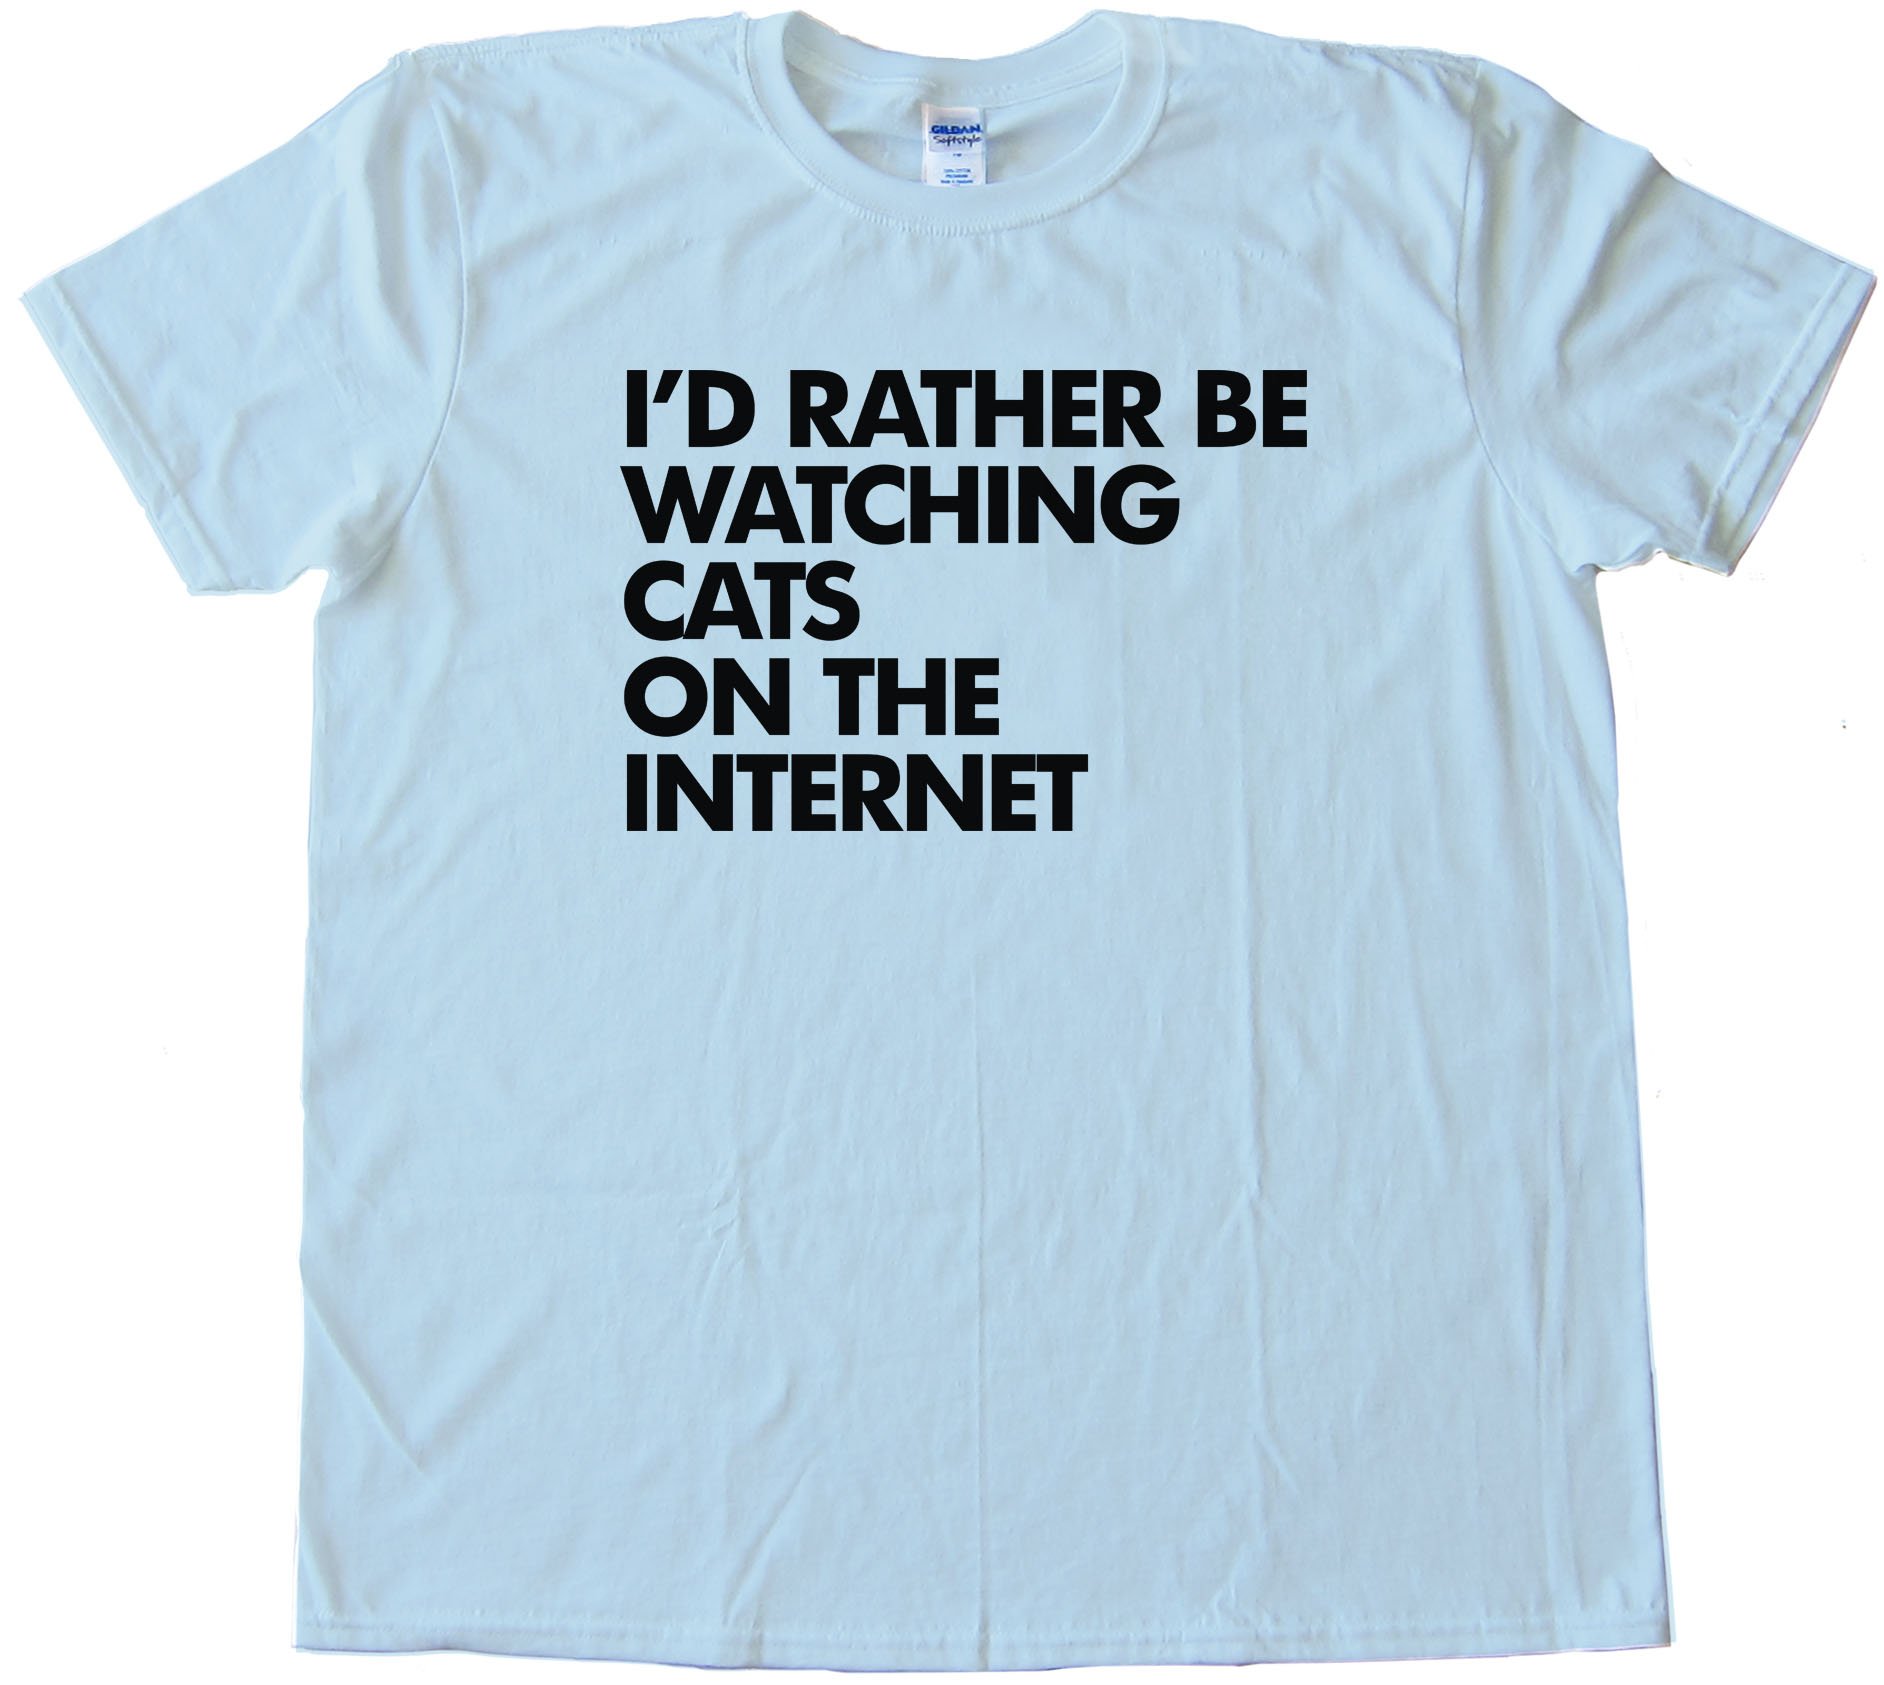 I'D Rather Be Watching Cats On The Internet - Tee Shirt